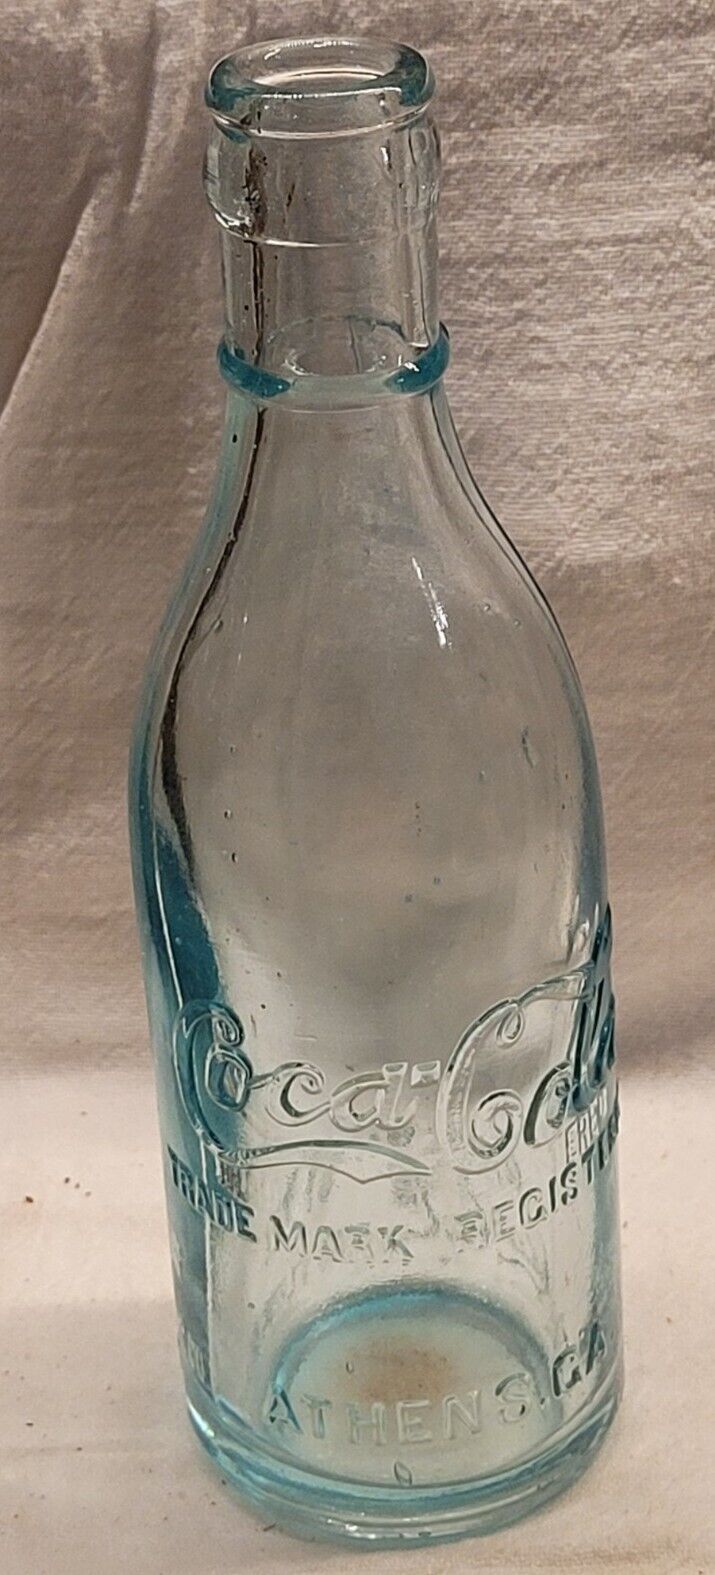 AWESOME STRAIGHT SIDE SCRIPT COCA COLA BOTTLE ATHENS GA RARE RINGNECK STYLE MINT